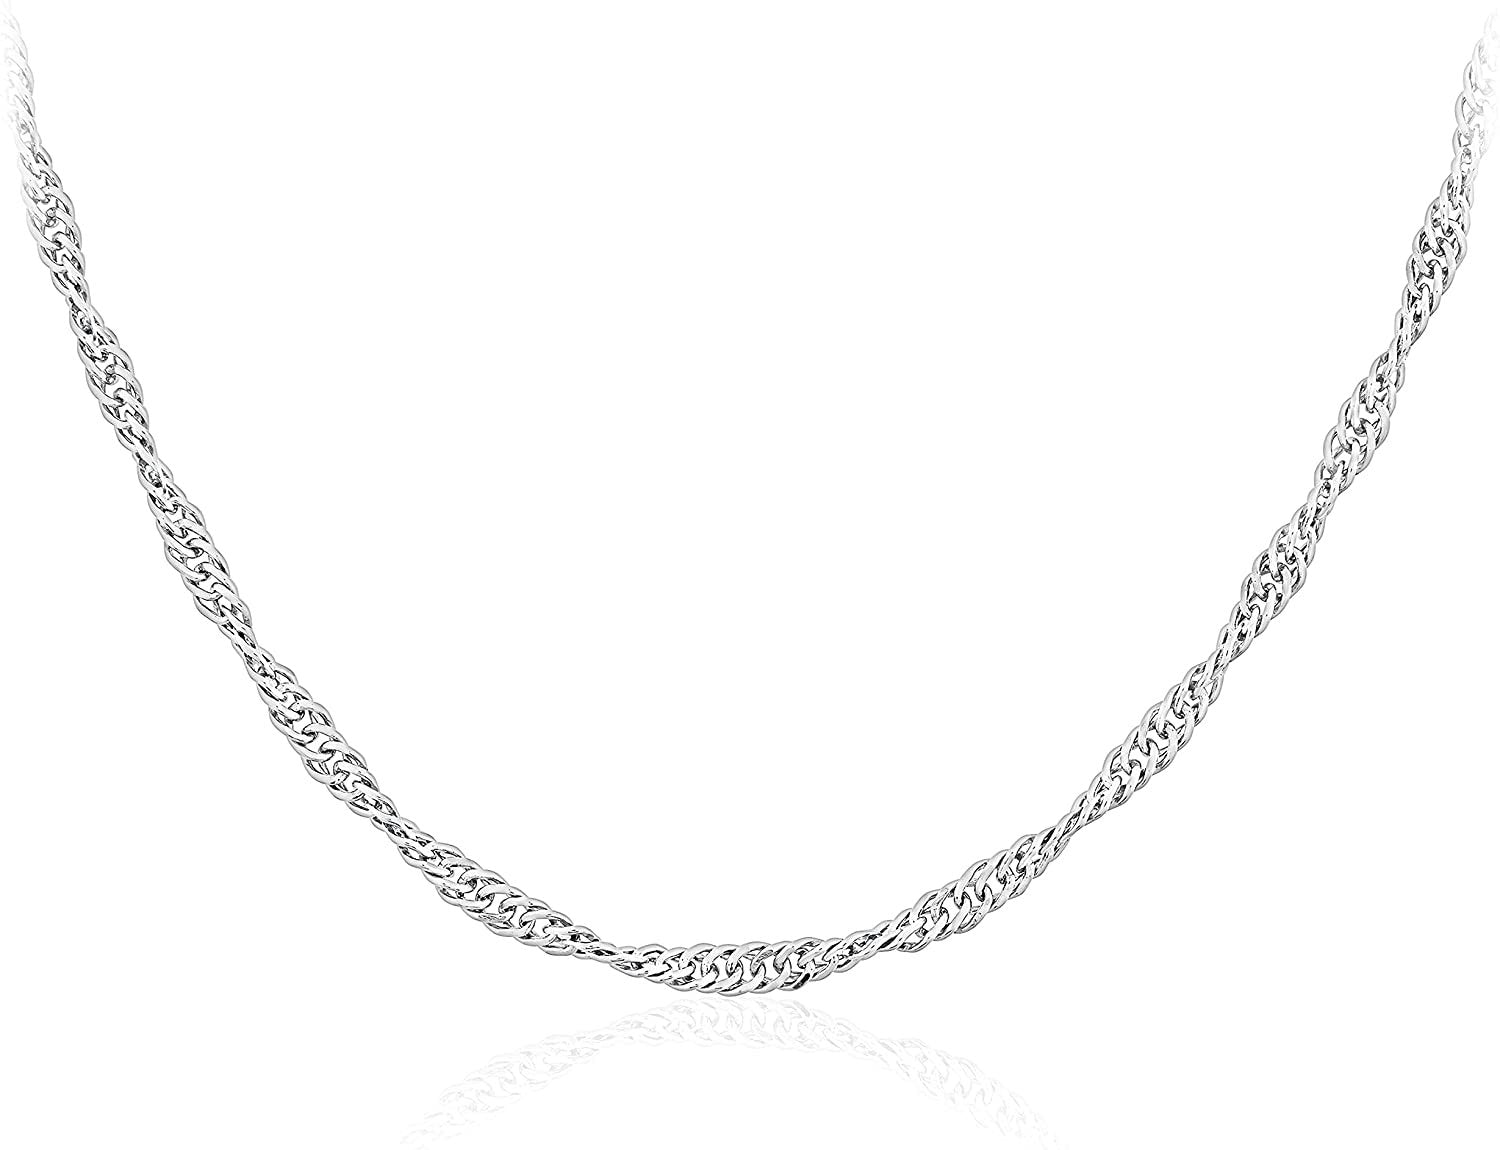 .925 Sterling Silver Singapore Chain Adjustable Length 20" - 22"